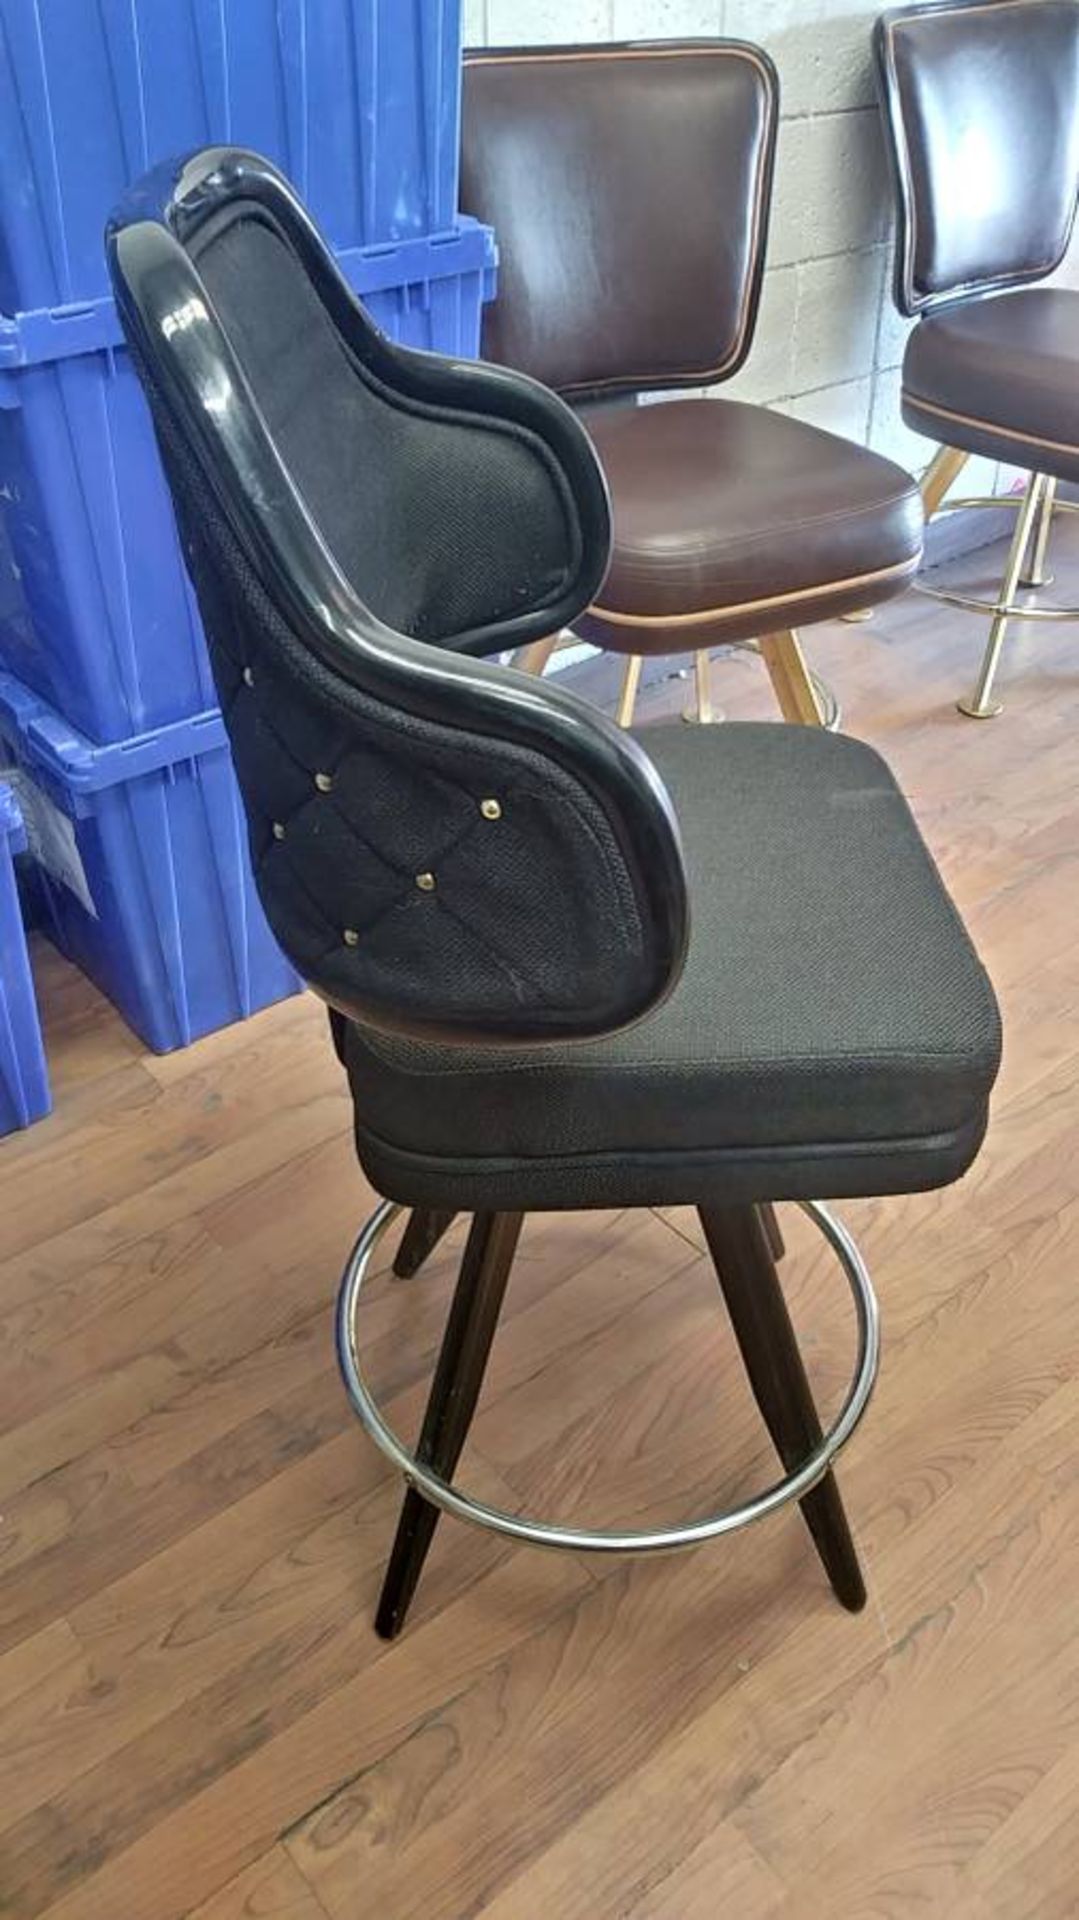 BLACK LOUNGE CHAIRS (SHORT STOOLS) W/ ARM & FOOTREST (X MONEY) (40" TOTAL H X 24" H FROM SEAT..) - Image 3 of 4